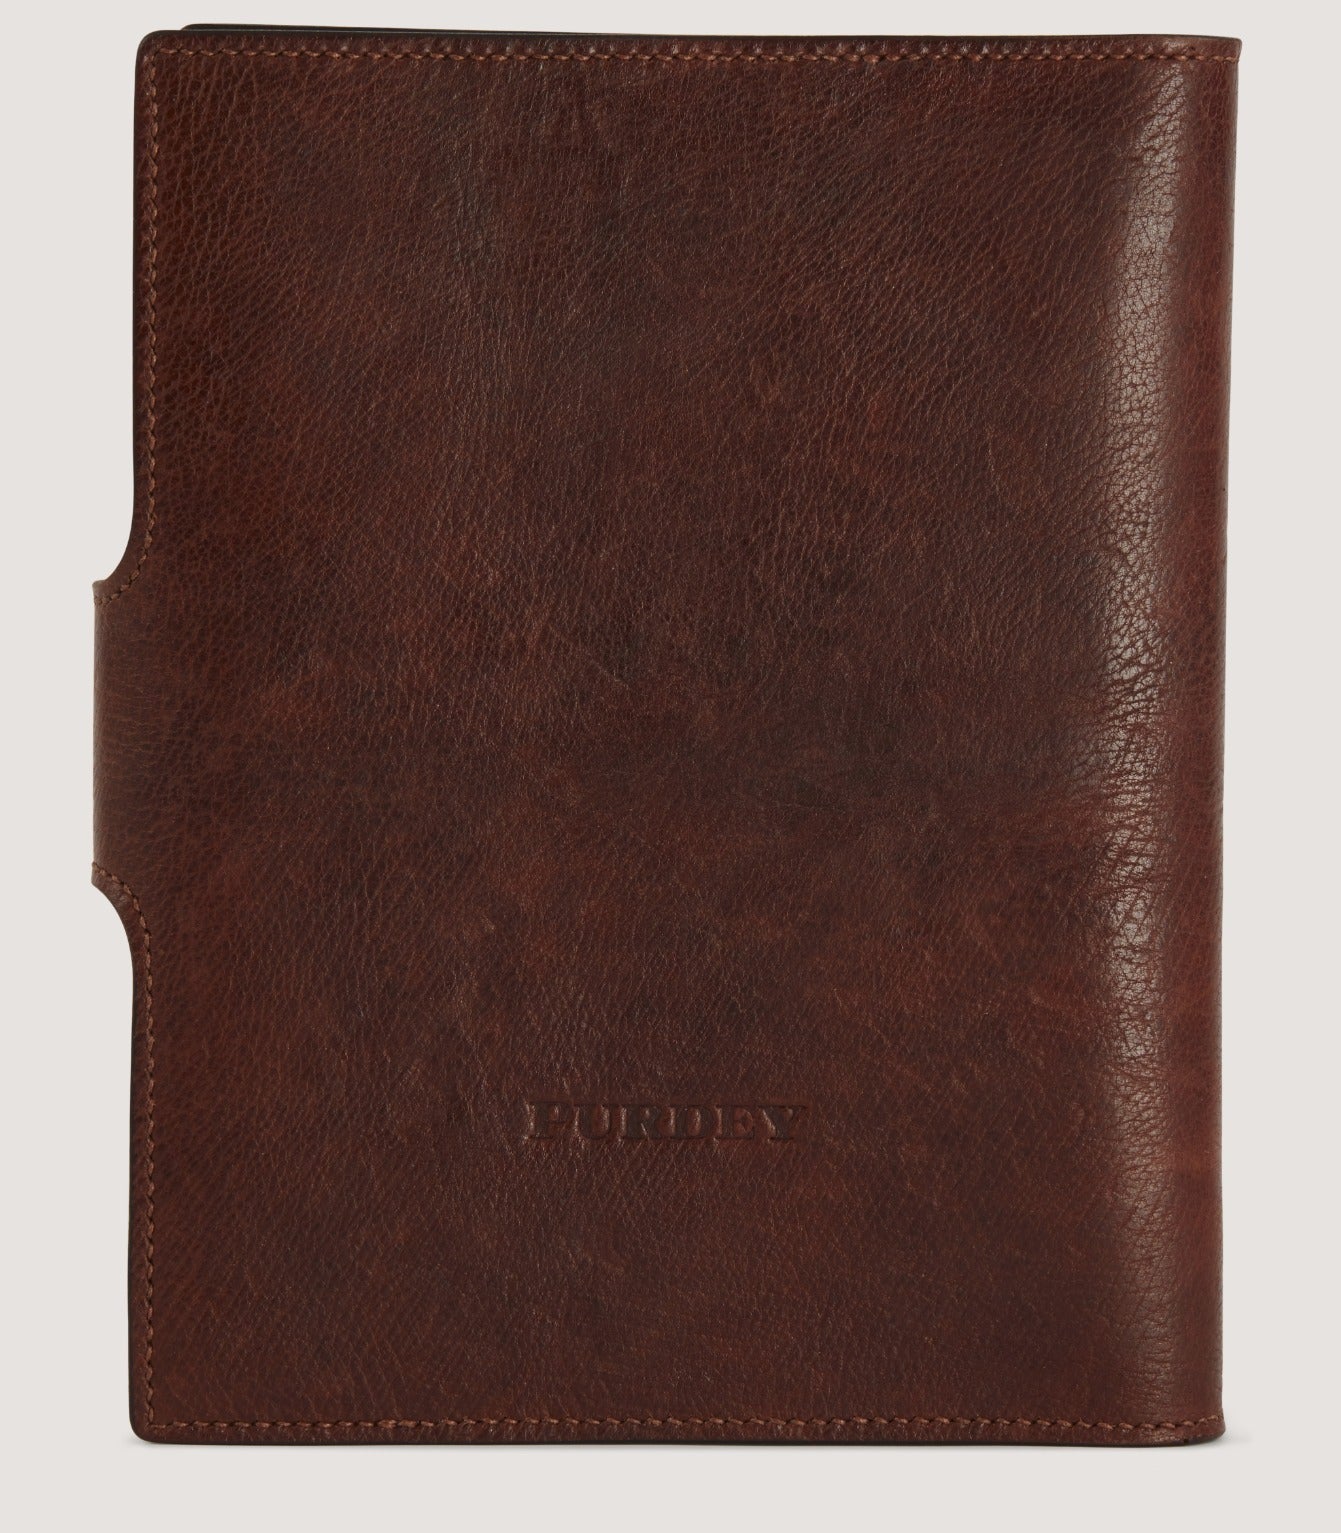 Russia Leather A5 Notebook Cover In Brown